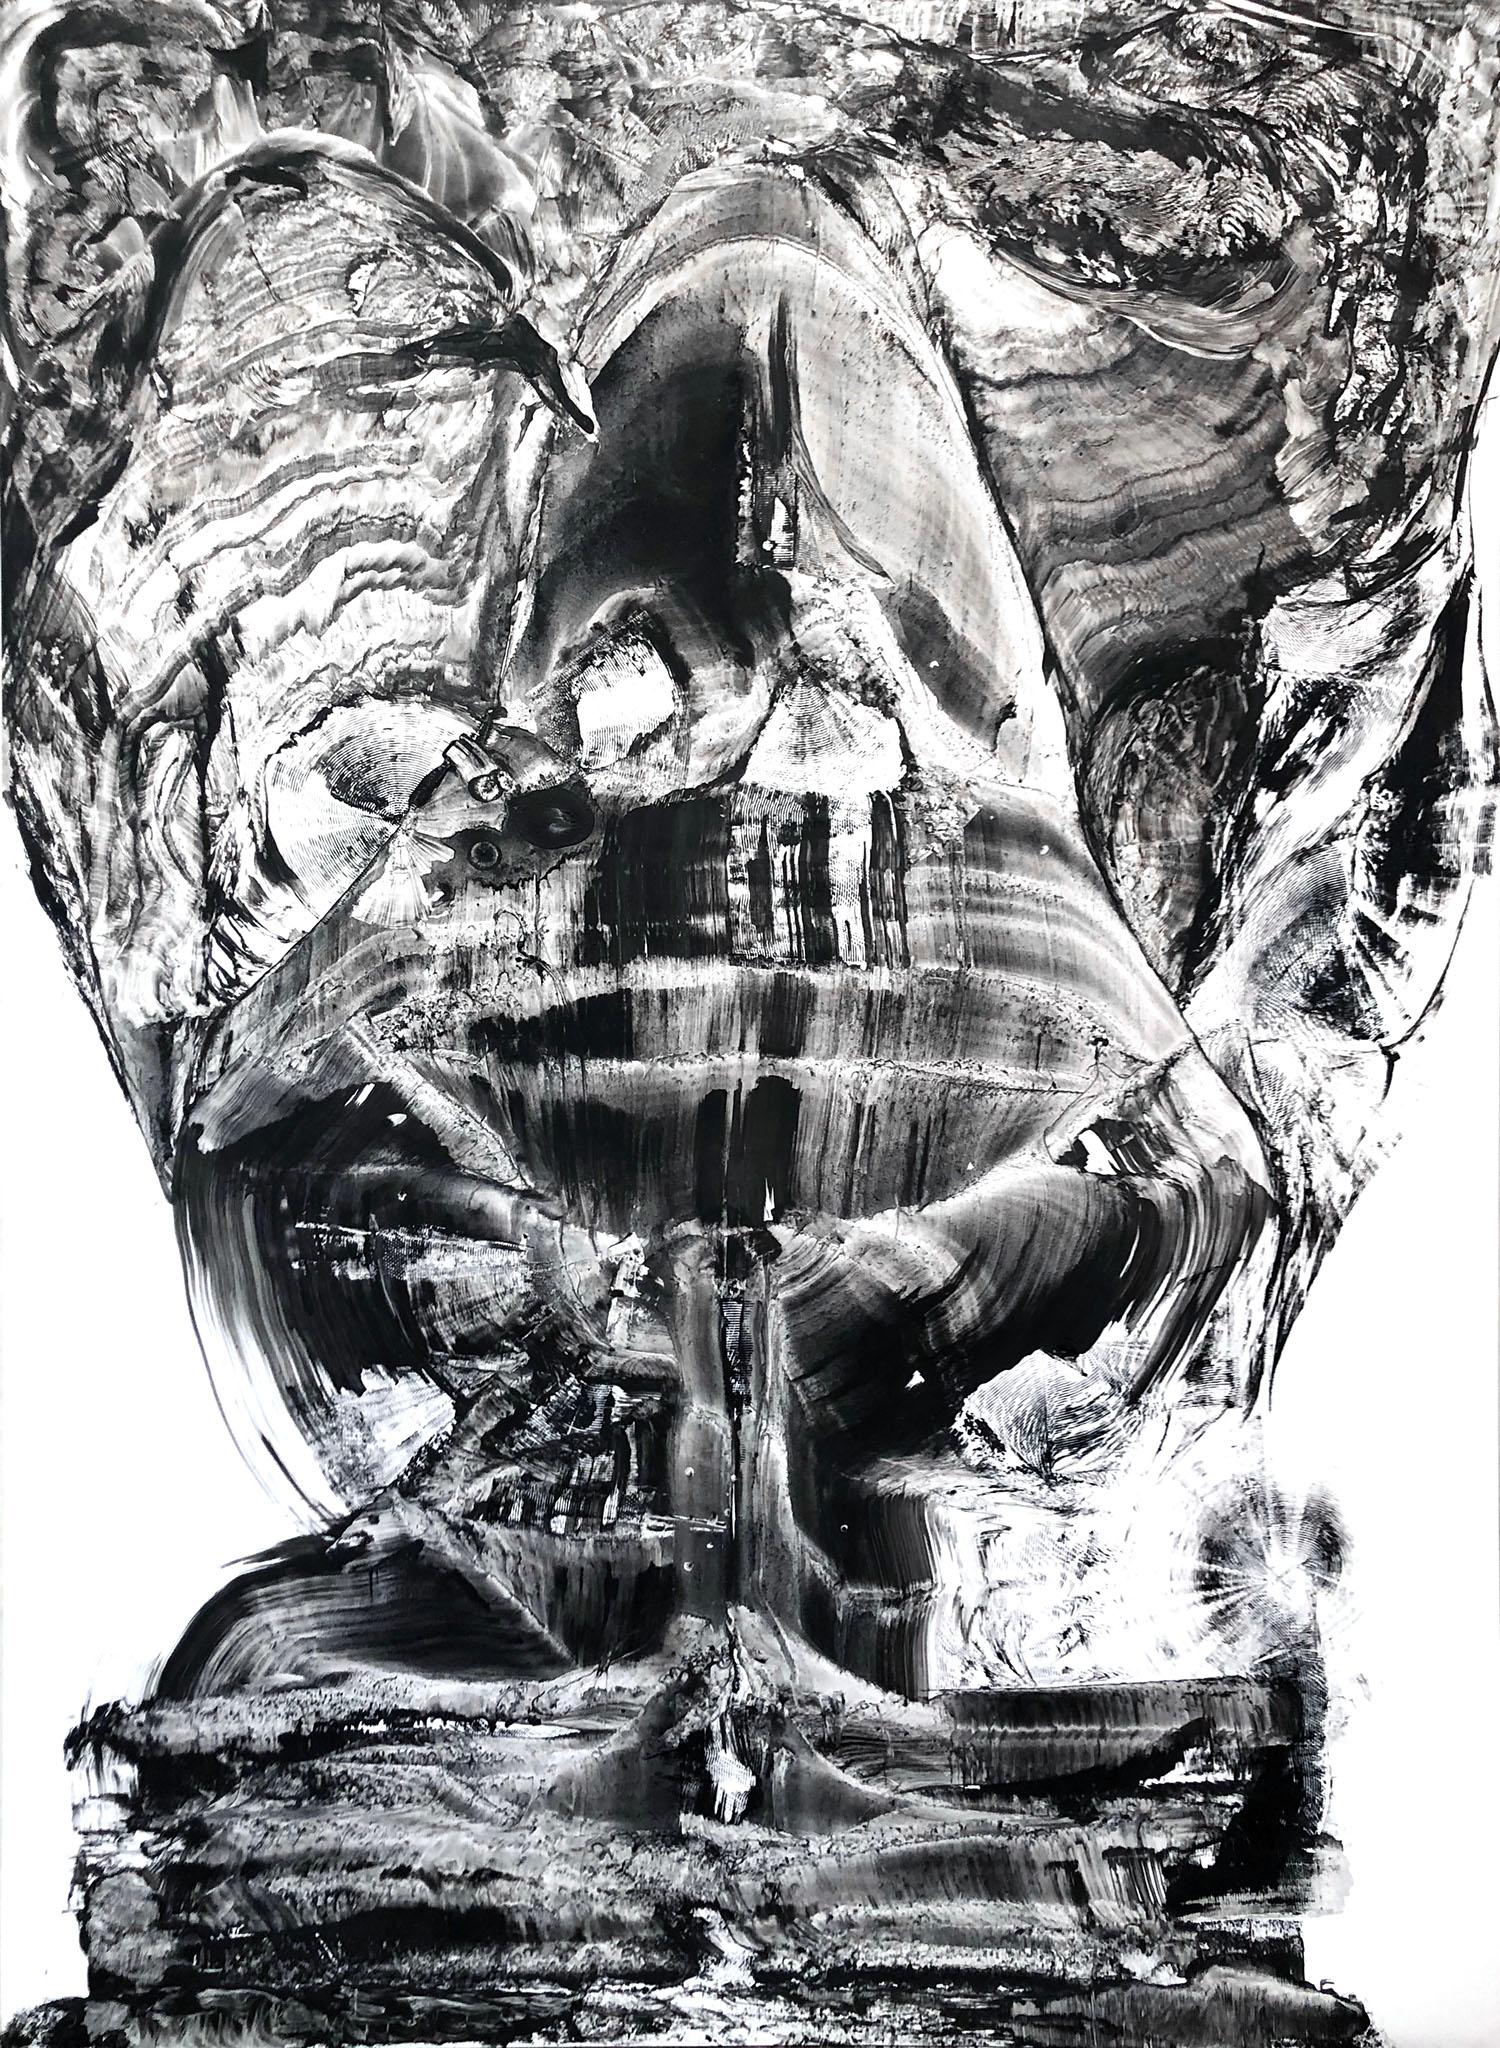 Volodymyr Zayichenko Abstract Drawing - Large black and white graphite work on paper PRAYER 2017 60x80 by Zayichenko